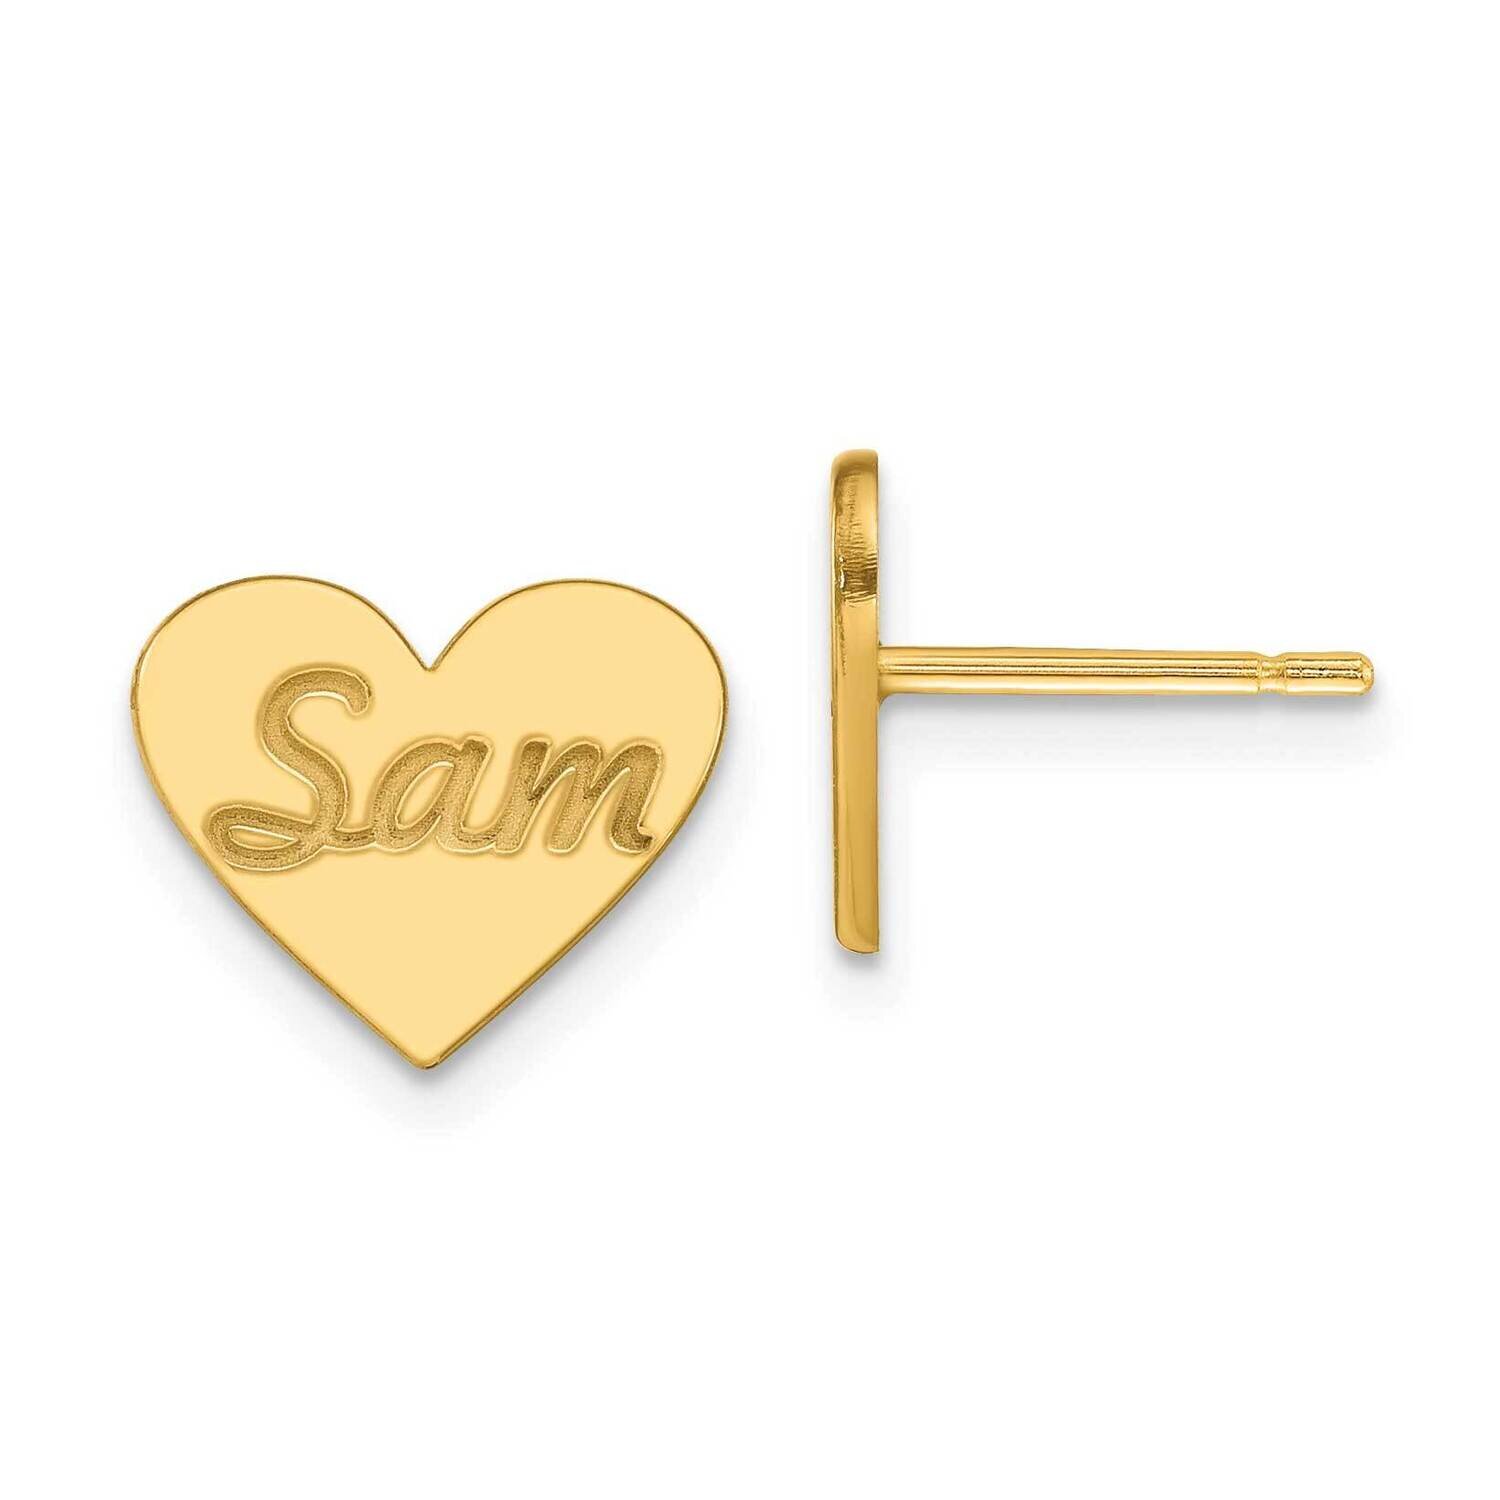 Personalized Heart Post Earrings 14k Gold Small XNE75Y